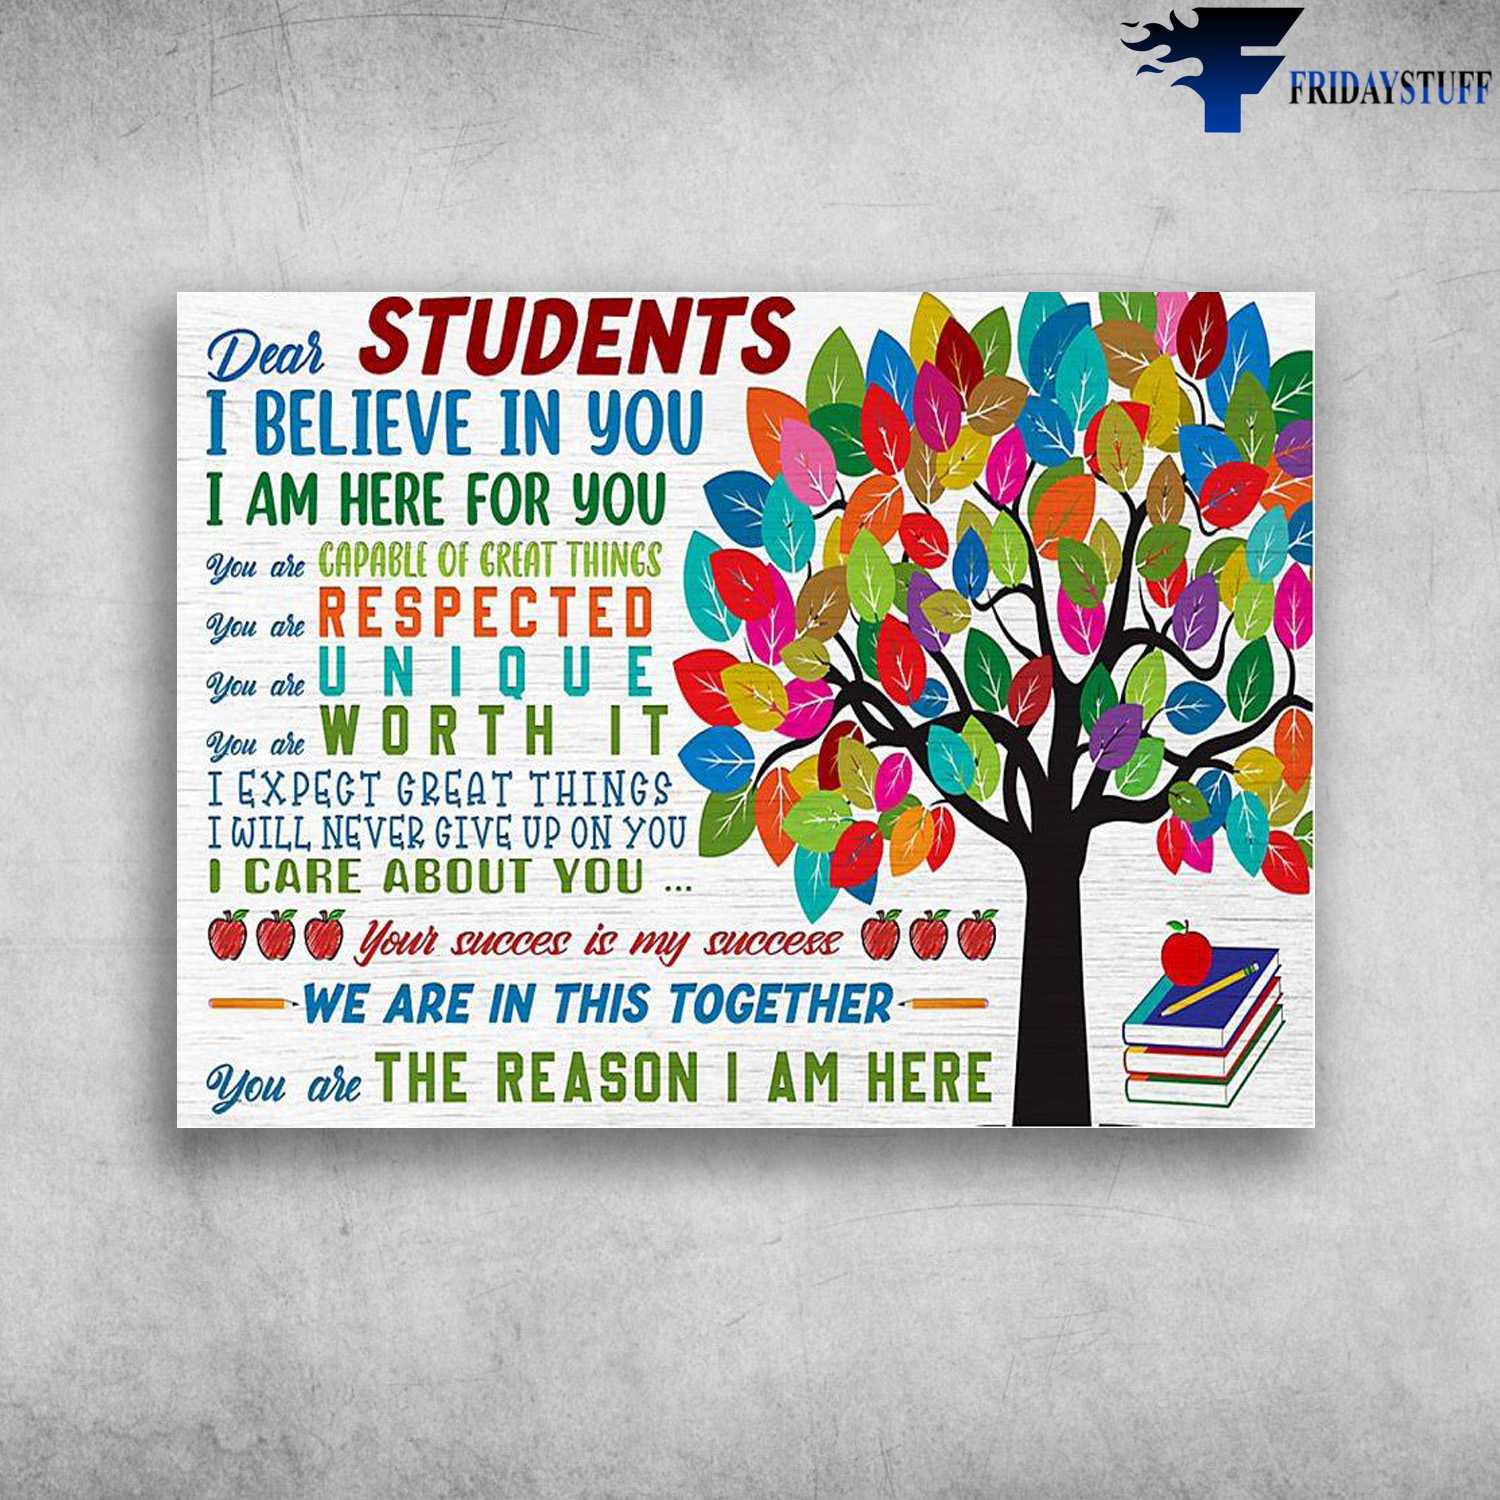 Teacher Student - Dear Students, I Believe In You, I Am Here For You, You Are Capable Of Great Things, You Are Respected, You Are Unique, You Are Worth It, You Are The Reason I Am Here